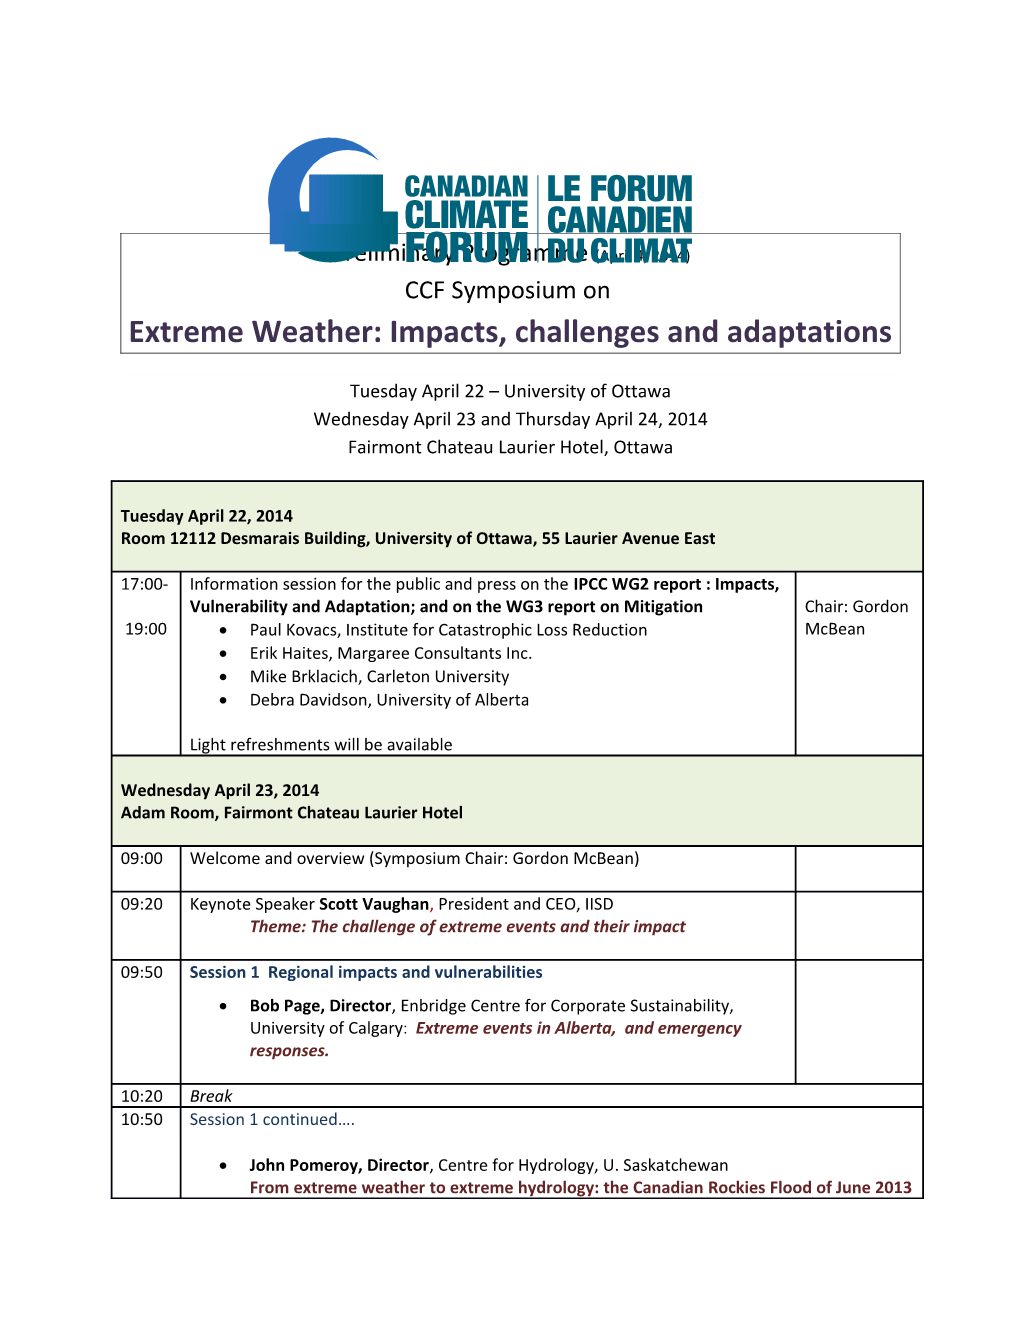 Extreme Weather: Impacts, Challenges and Adaptations